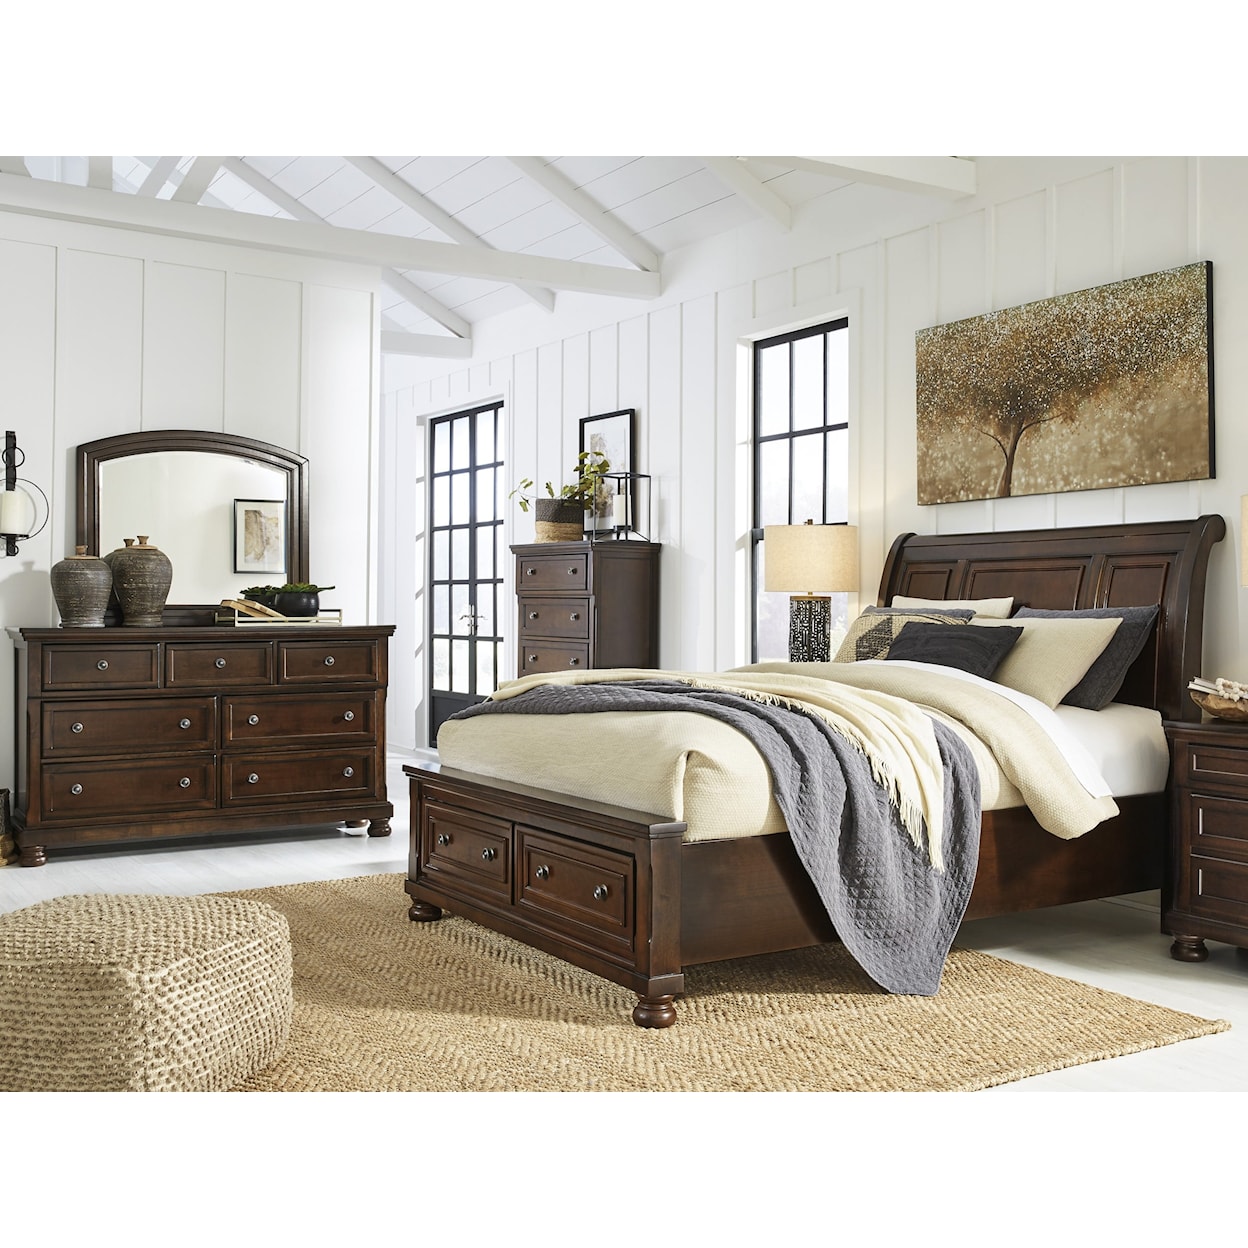 Ashley Furniture Porter Queen 5-PC Bedroom Group